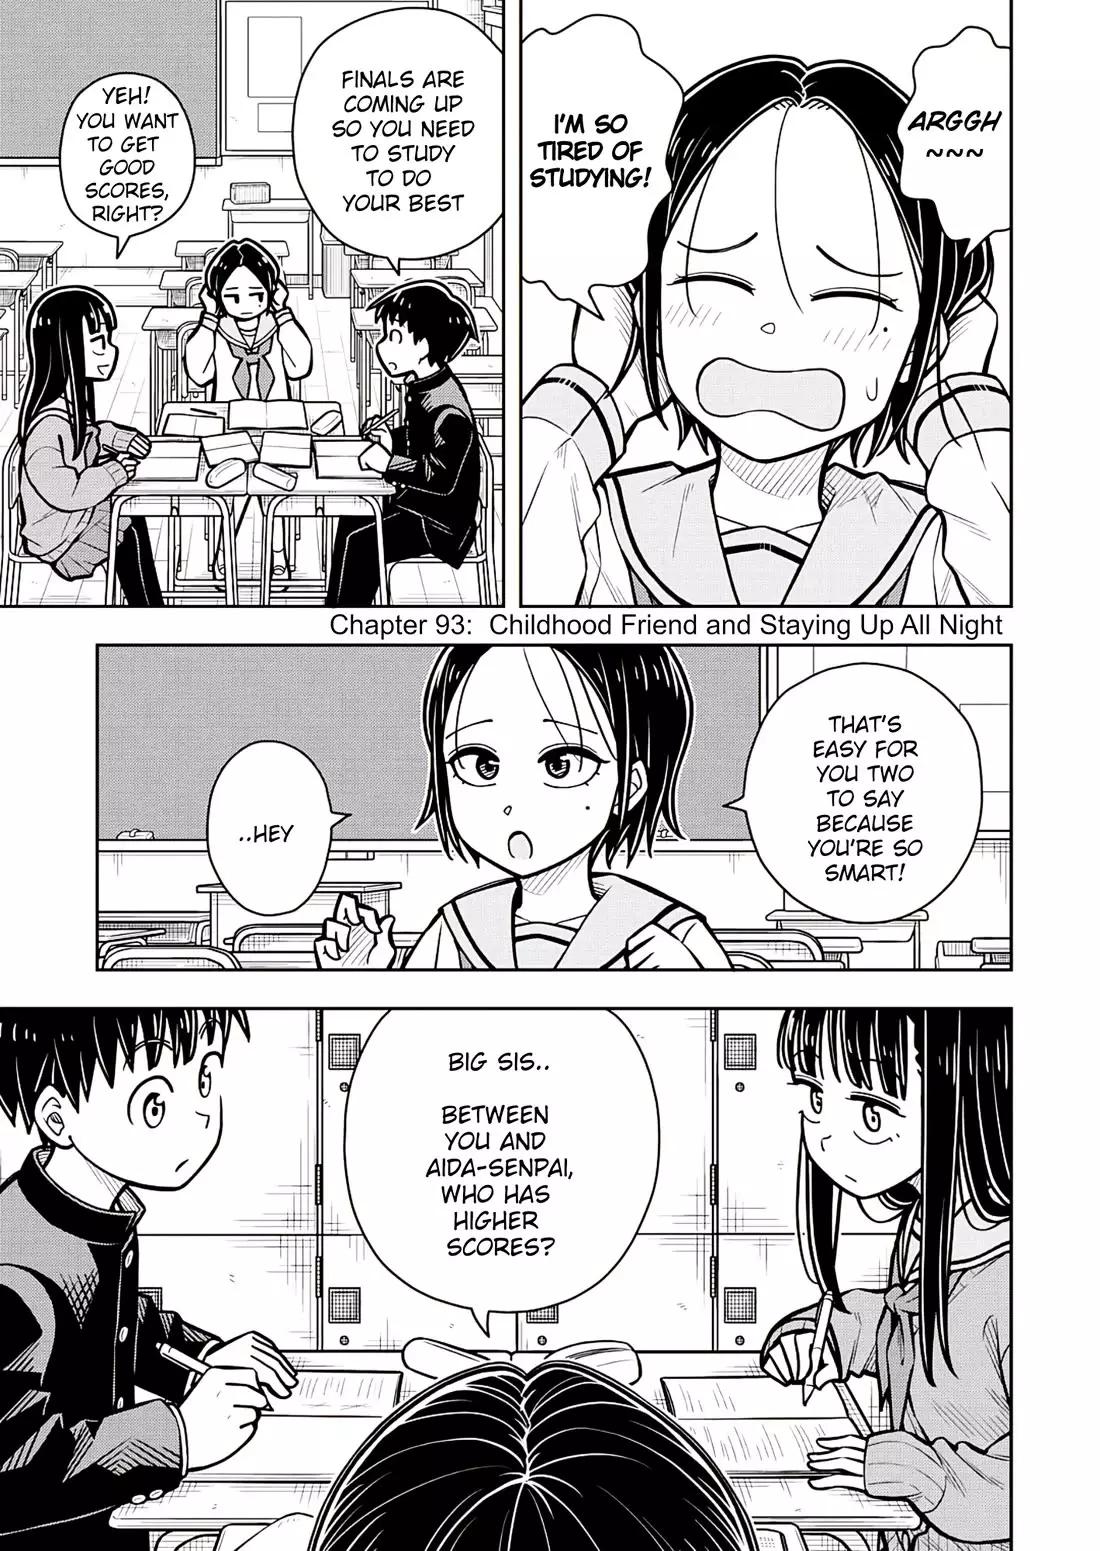 Starting Today She's My Childhood Friend - 93 page 1-86720c53